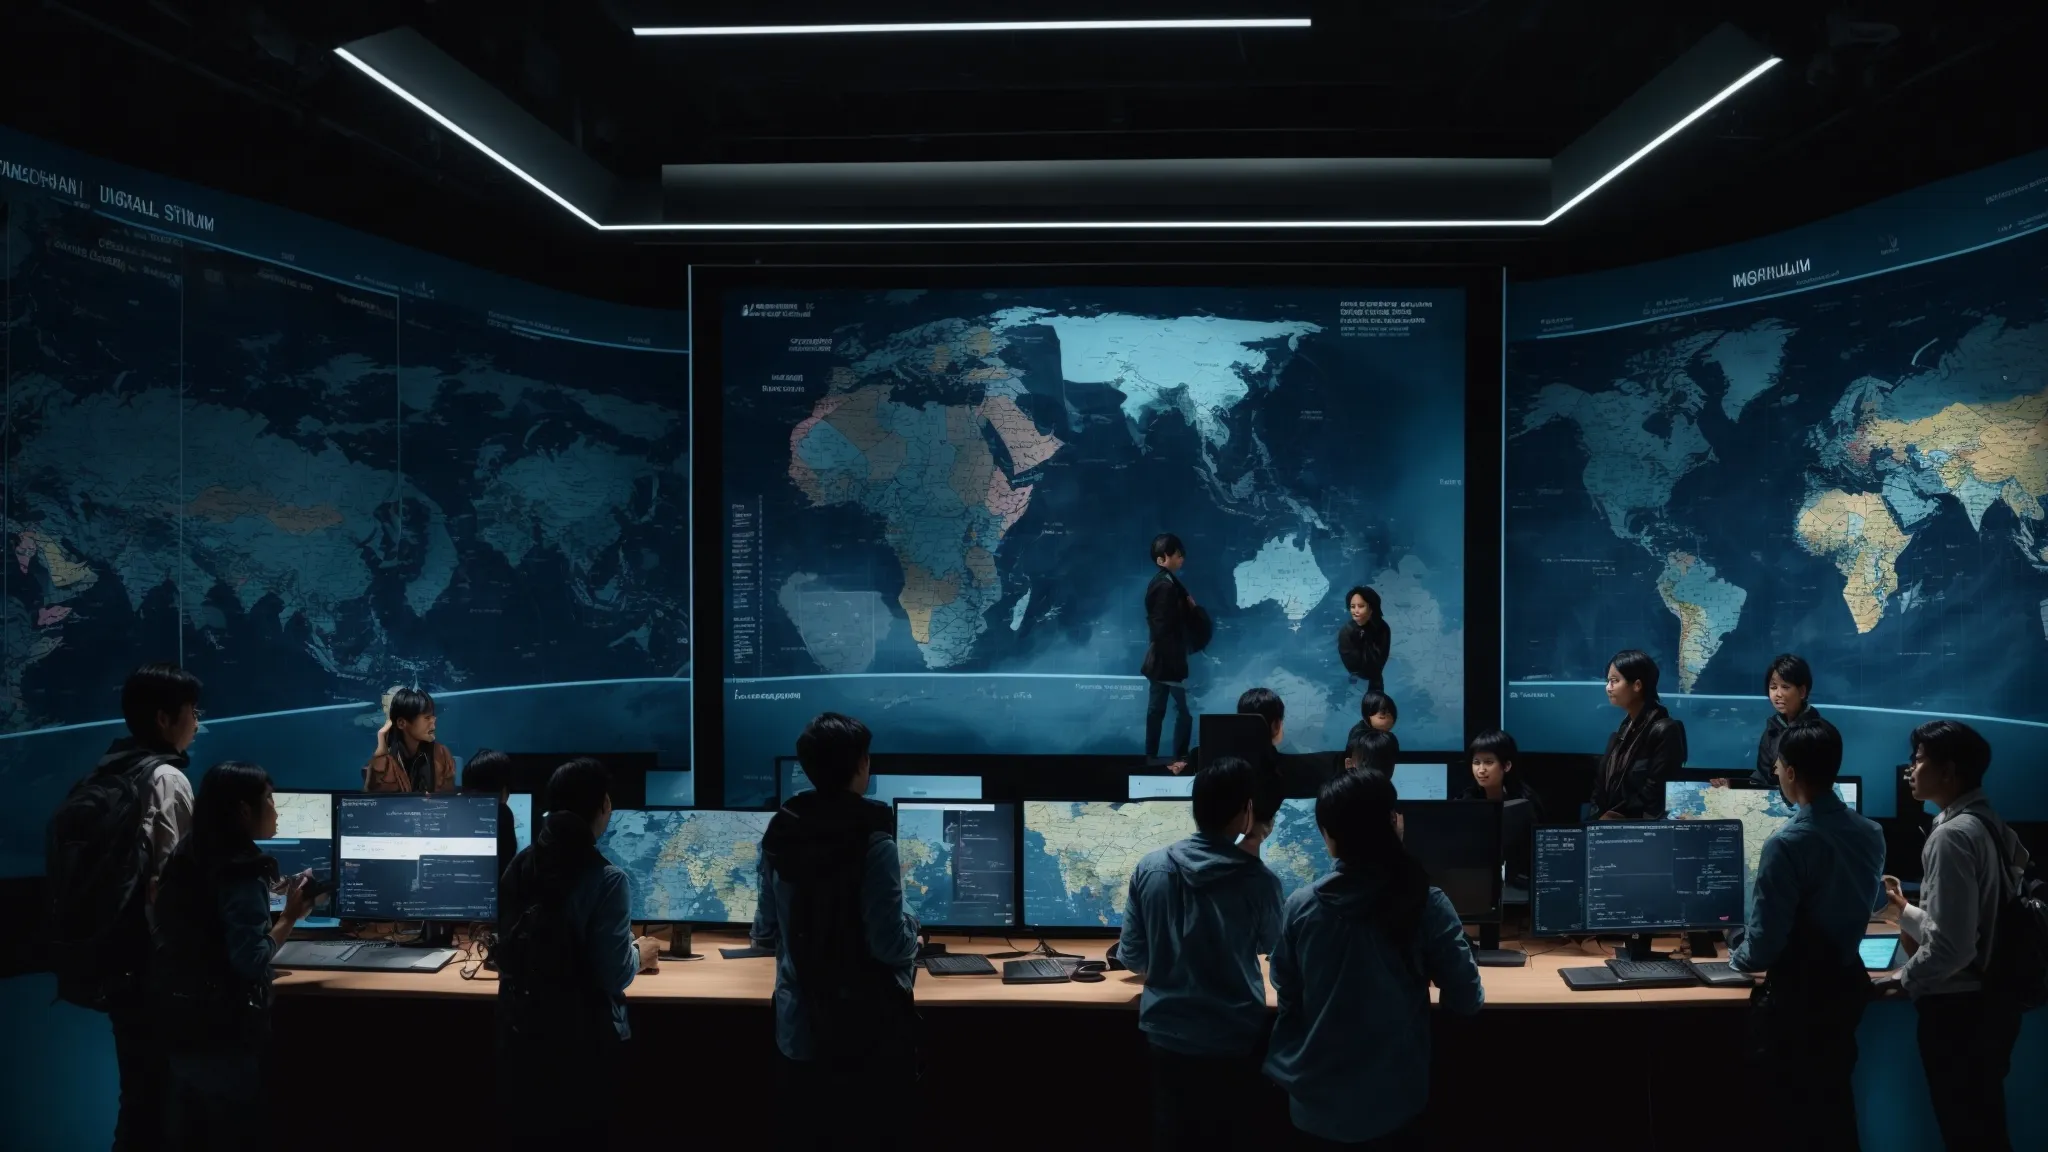 a team of multicultural professionals collaborates around a high-tech digital screen displaying a world map.